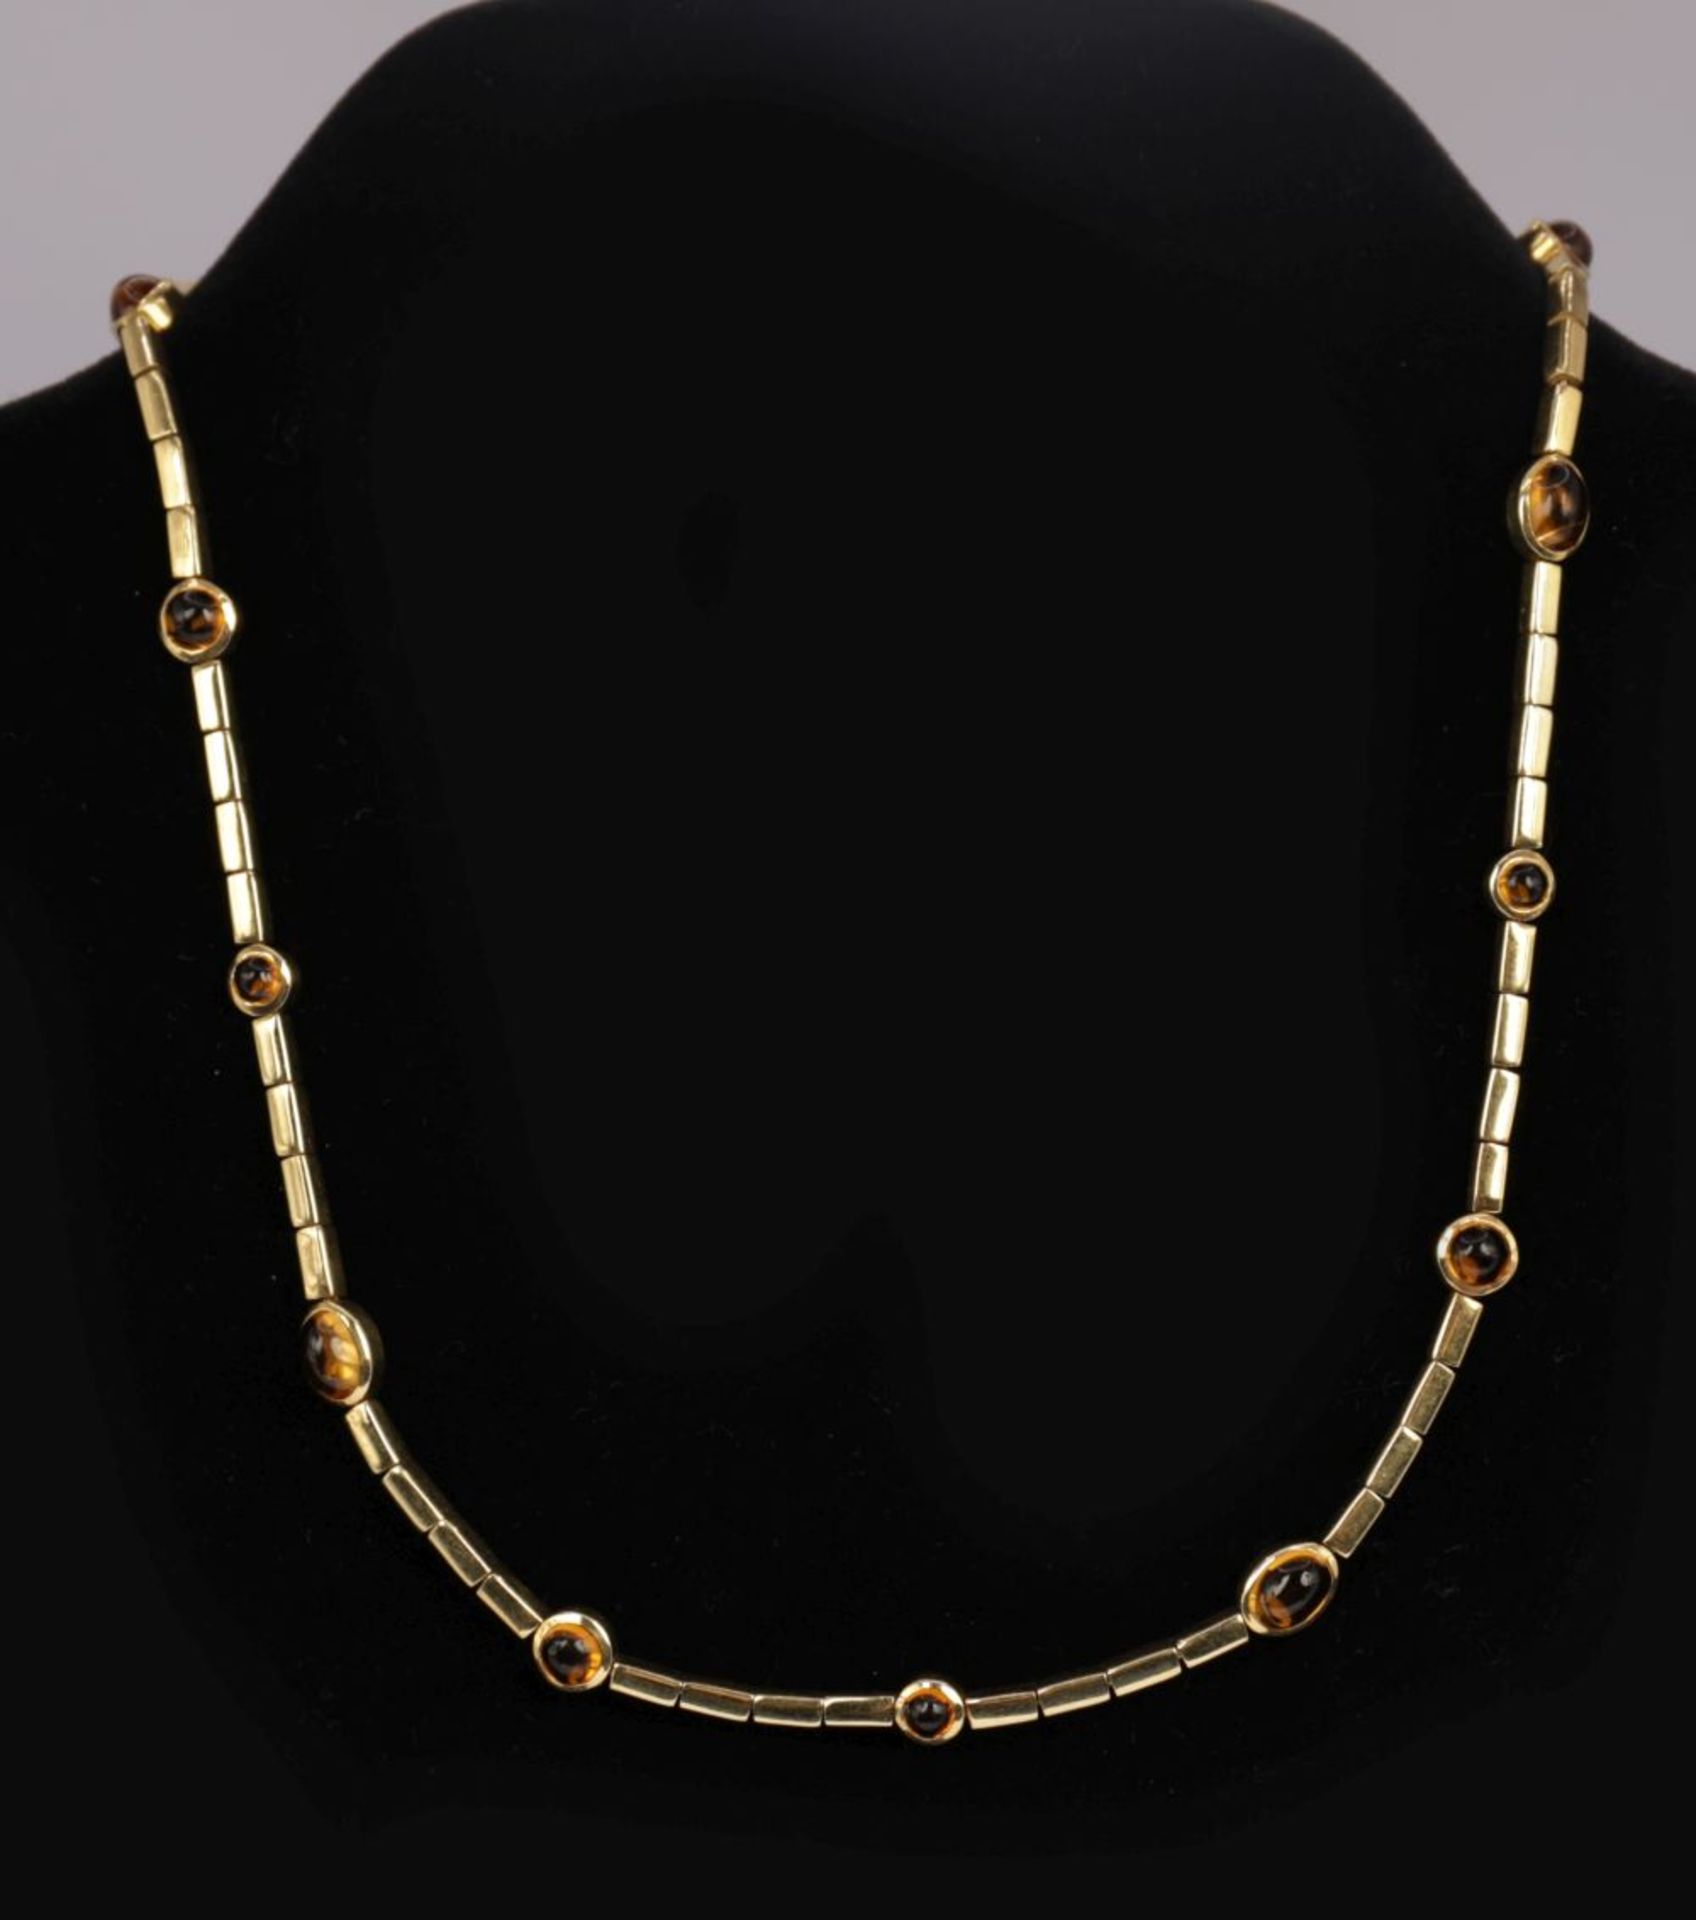 GOLD CITRINE NECKLACE - Image 4 of 4